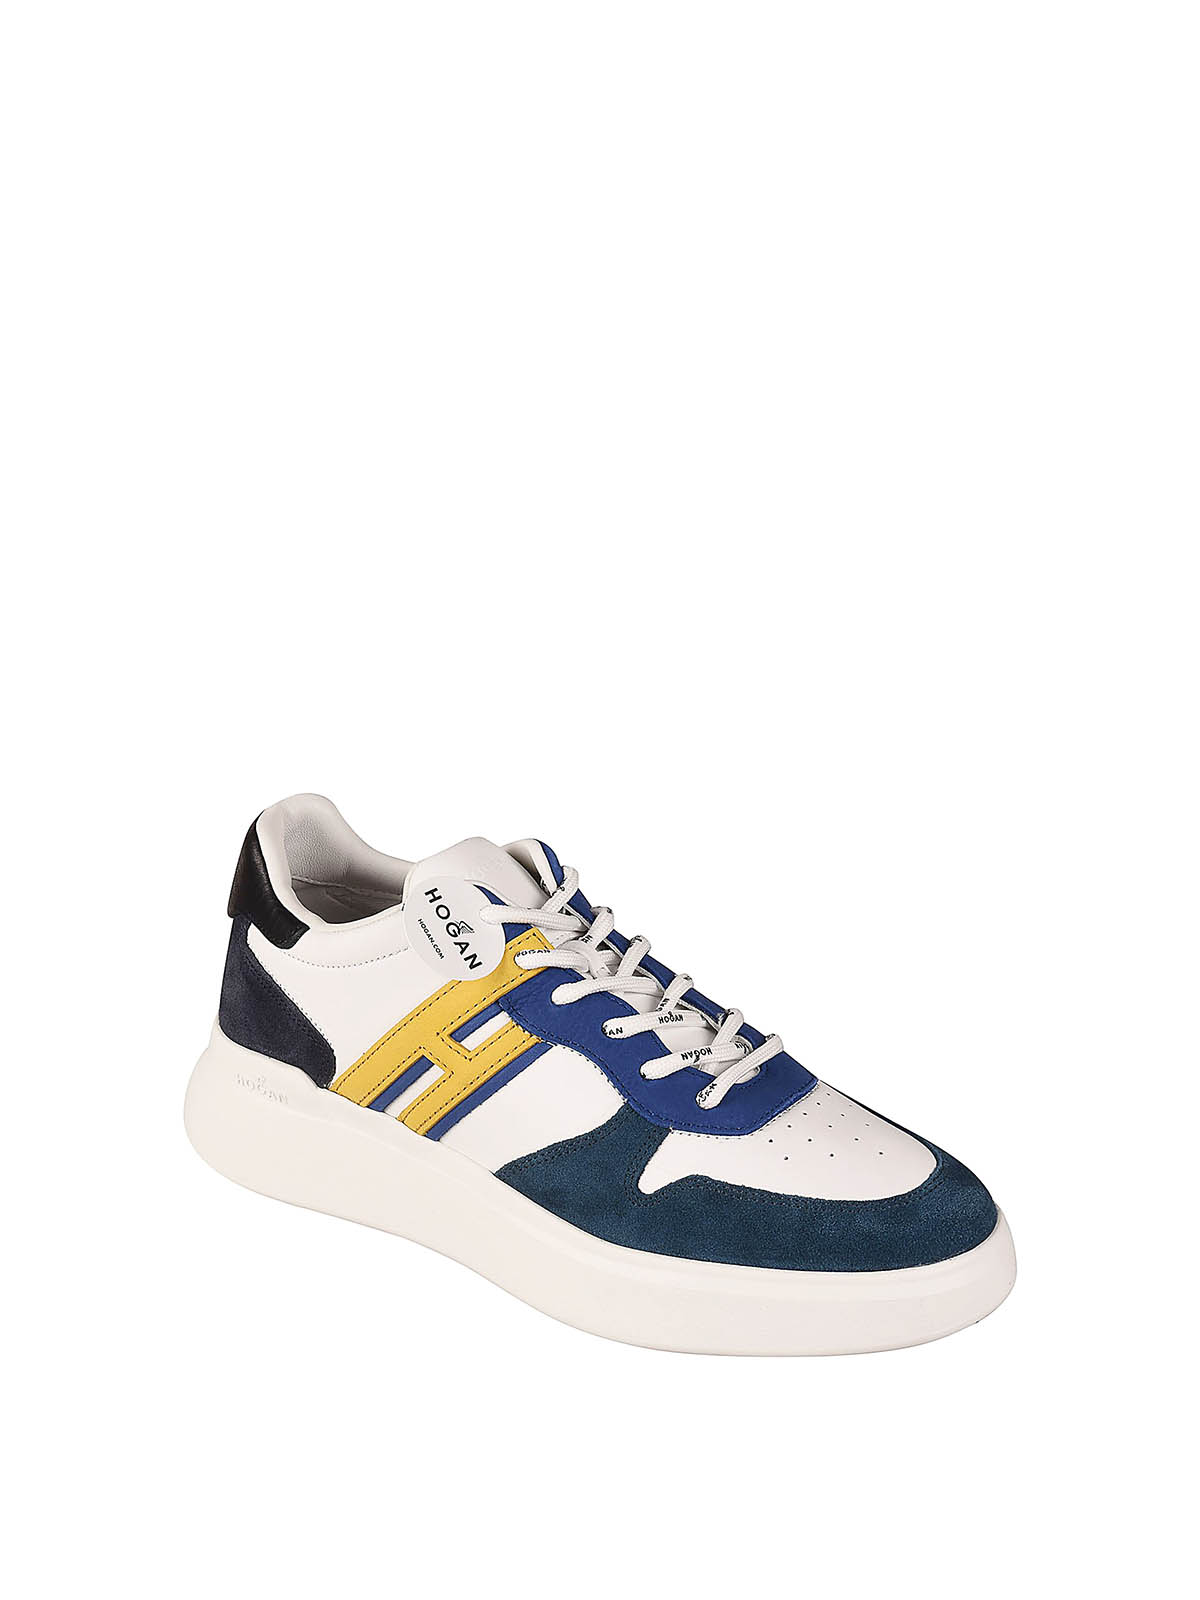 Trainers Hogan - H580 sneakers - HXM5800EF20RJH50CT | Shop online at iKRIX